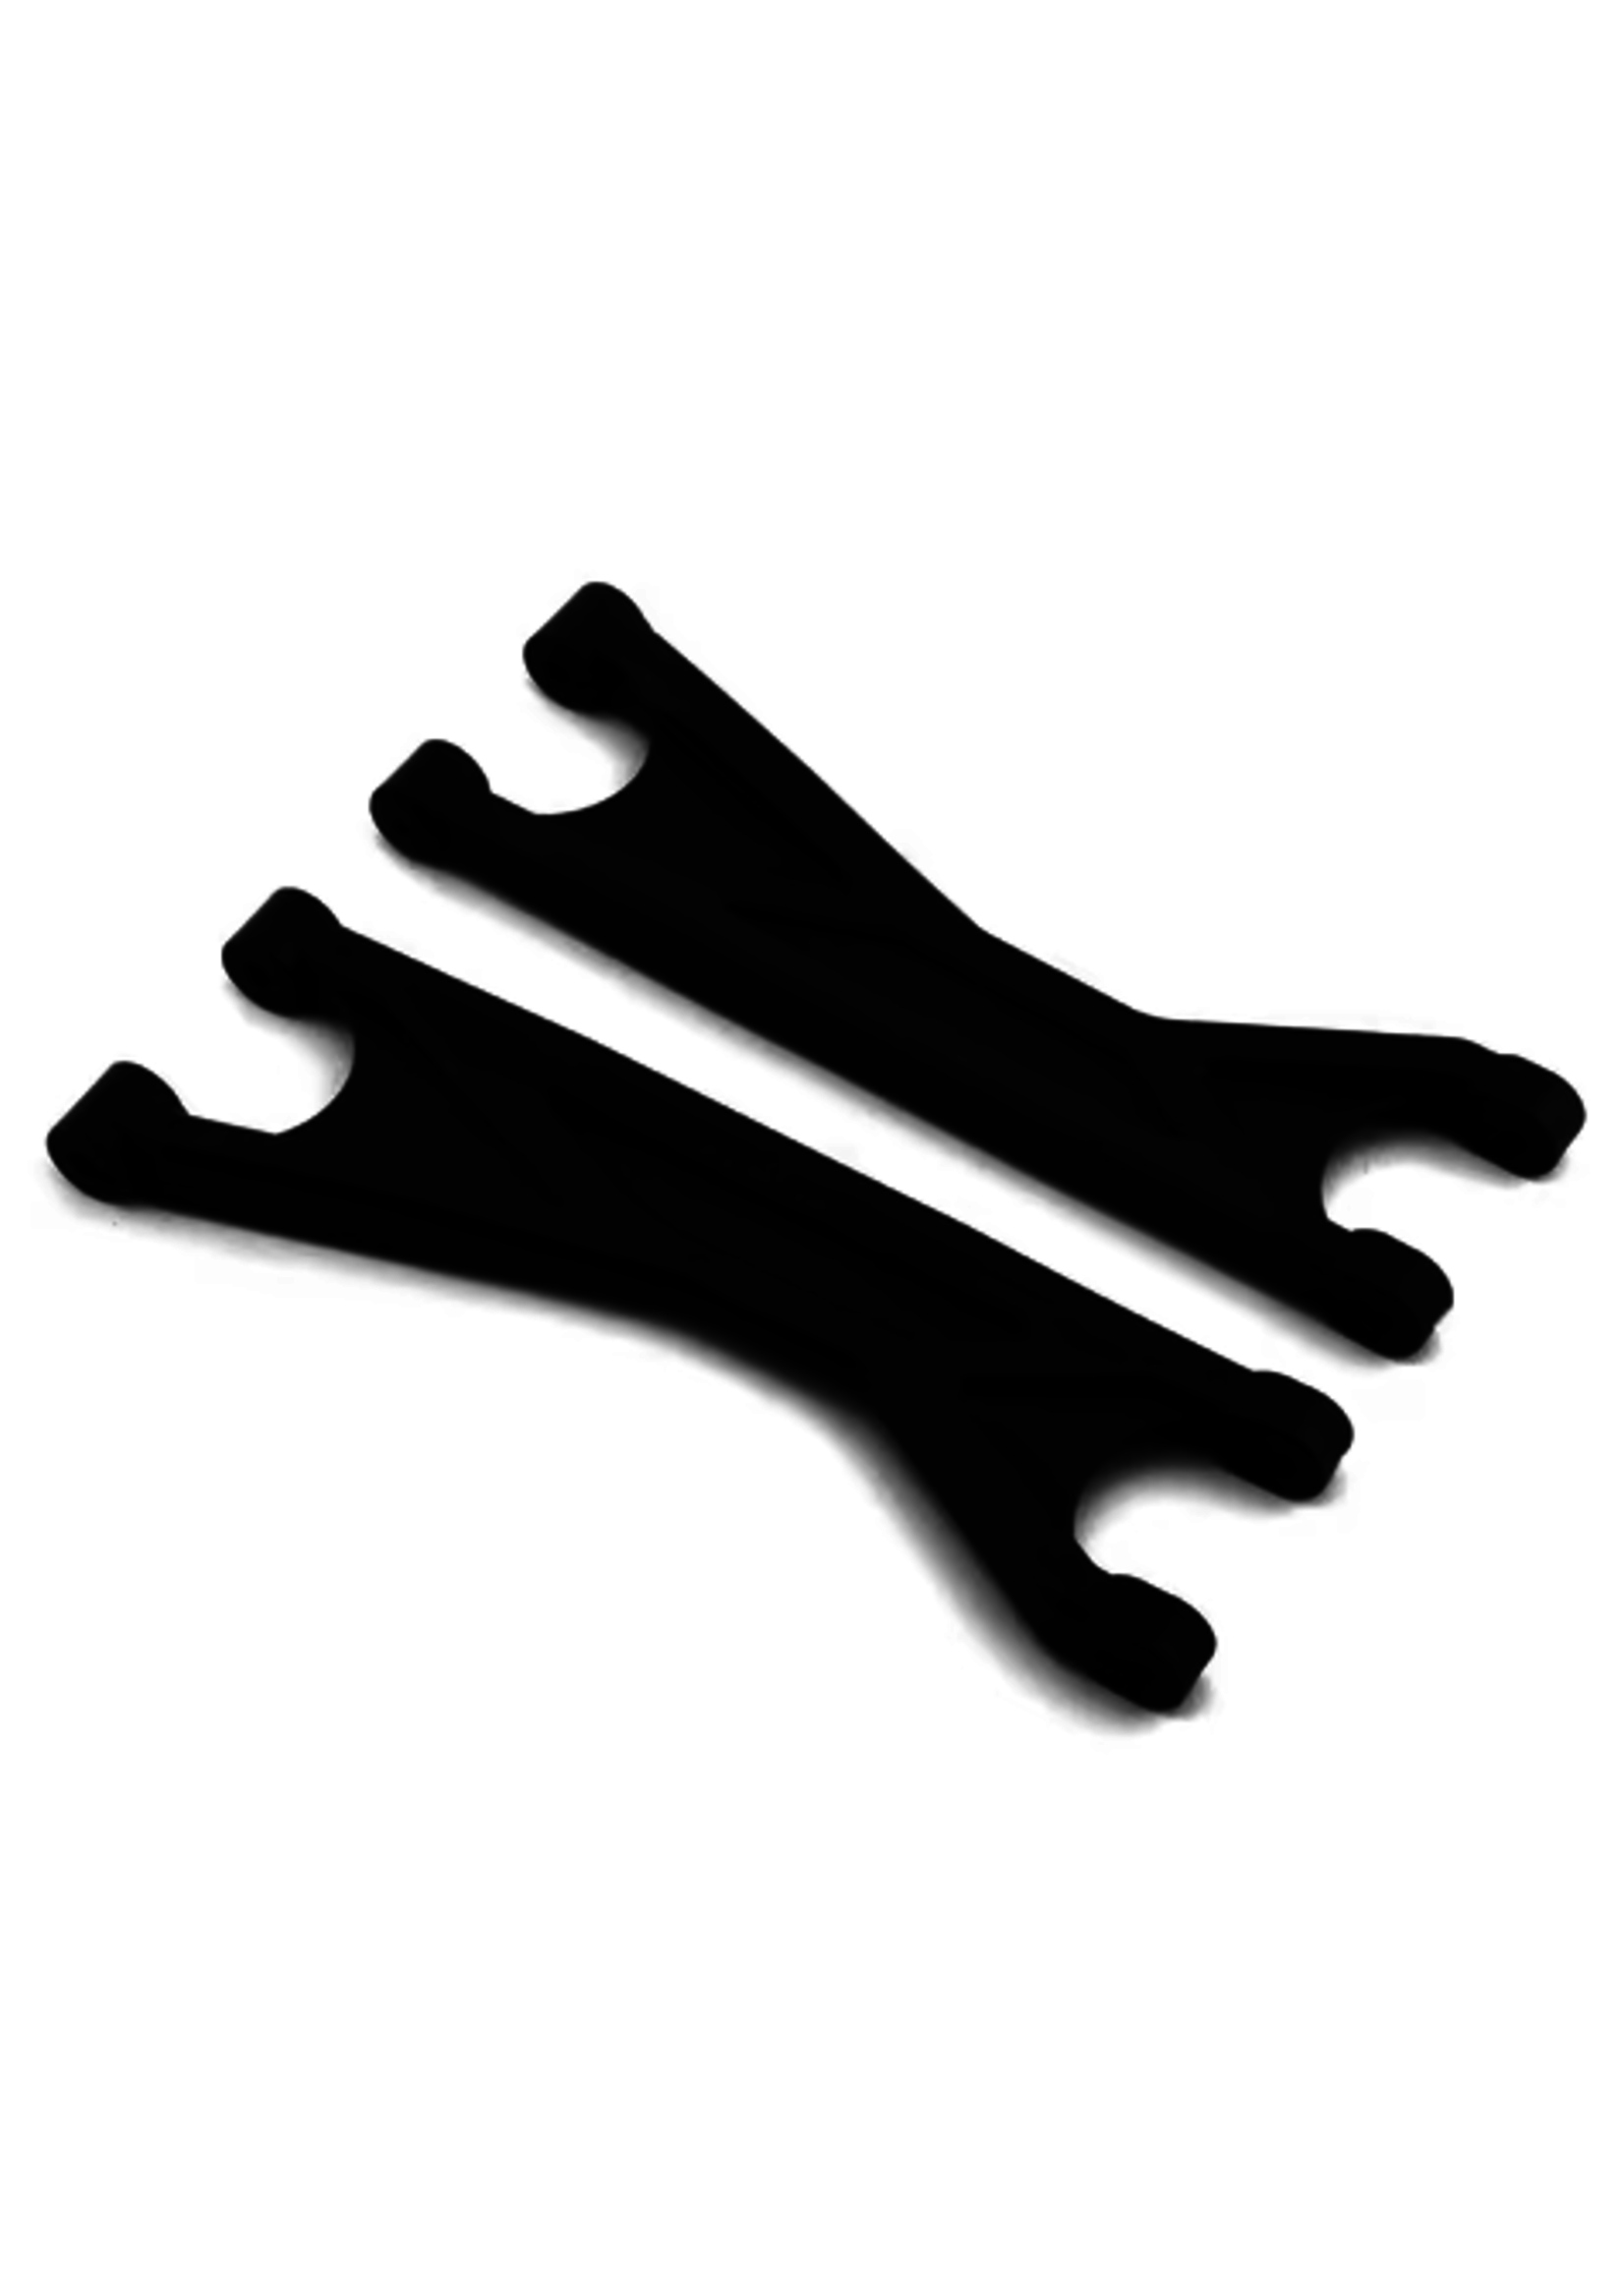 Traxxas TRA7829 Traxxas Suspension arm, black, upper (left or right, front or rear), heavy duty (2)